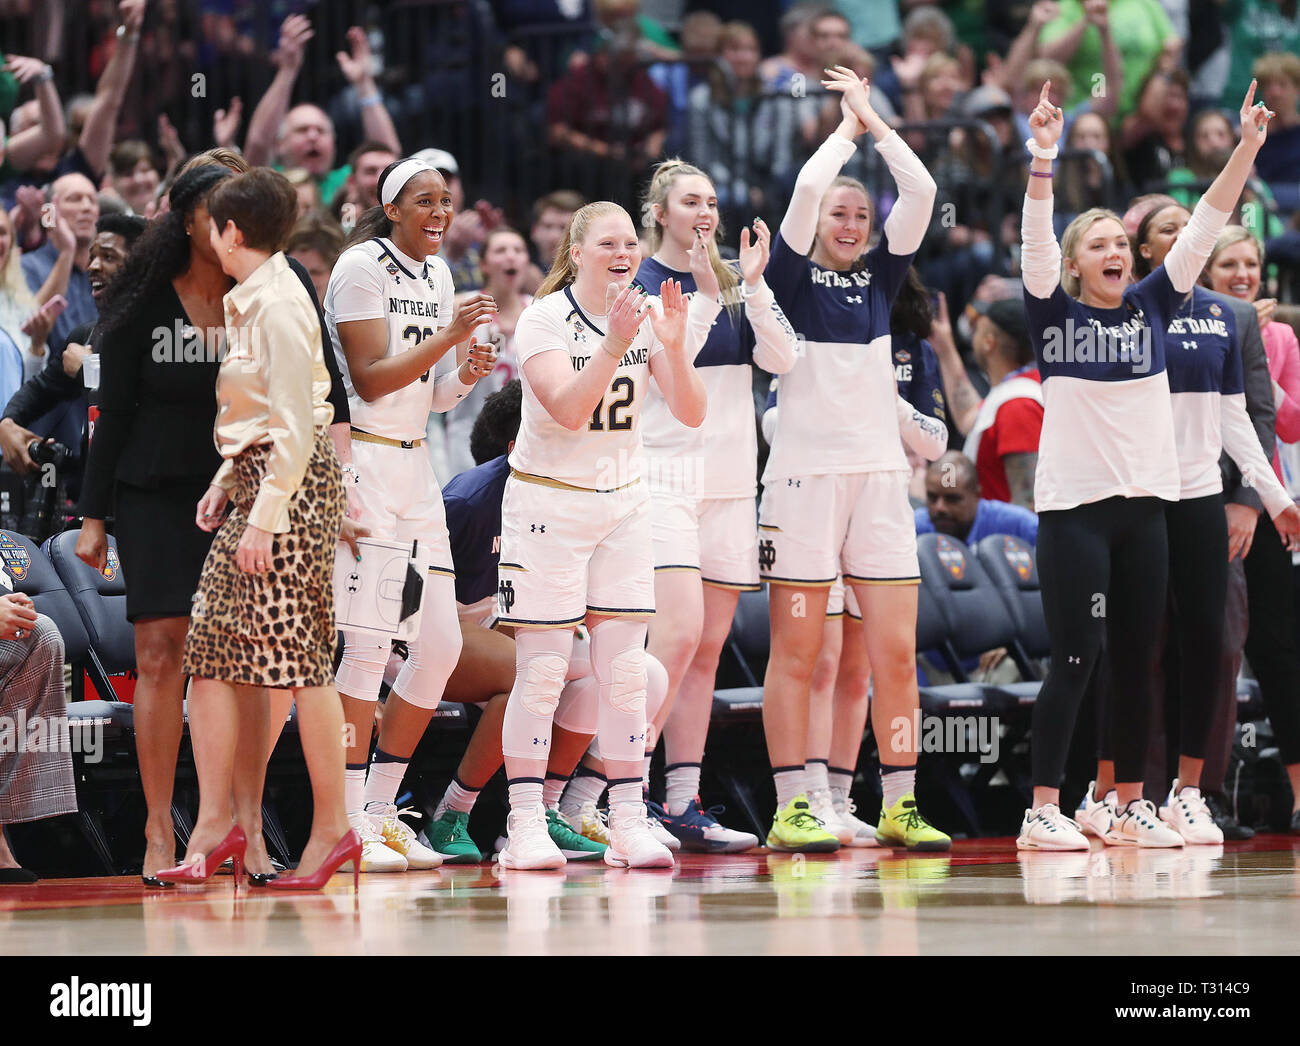 City, Florida, USA. 5th Apr, 2019. MONICA HERNDON | Times .Notre Dame Fighting Irish bench celebrate the lead over the UConn Huskies in the second half of the NCAA Women's Final Four semifinal game at the Amalie Arena on Friday, April 5, 2019. Credit: Monica Herndon/Tampa Bay Times/ZUMA Wire/Alamy Live News Stock Photo